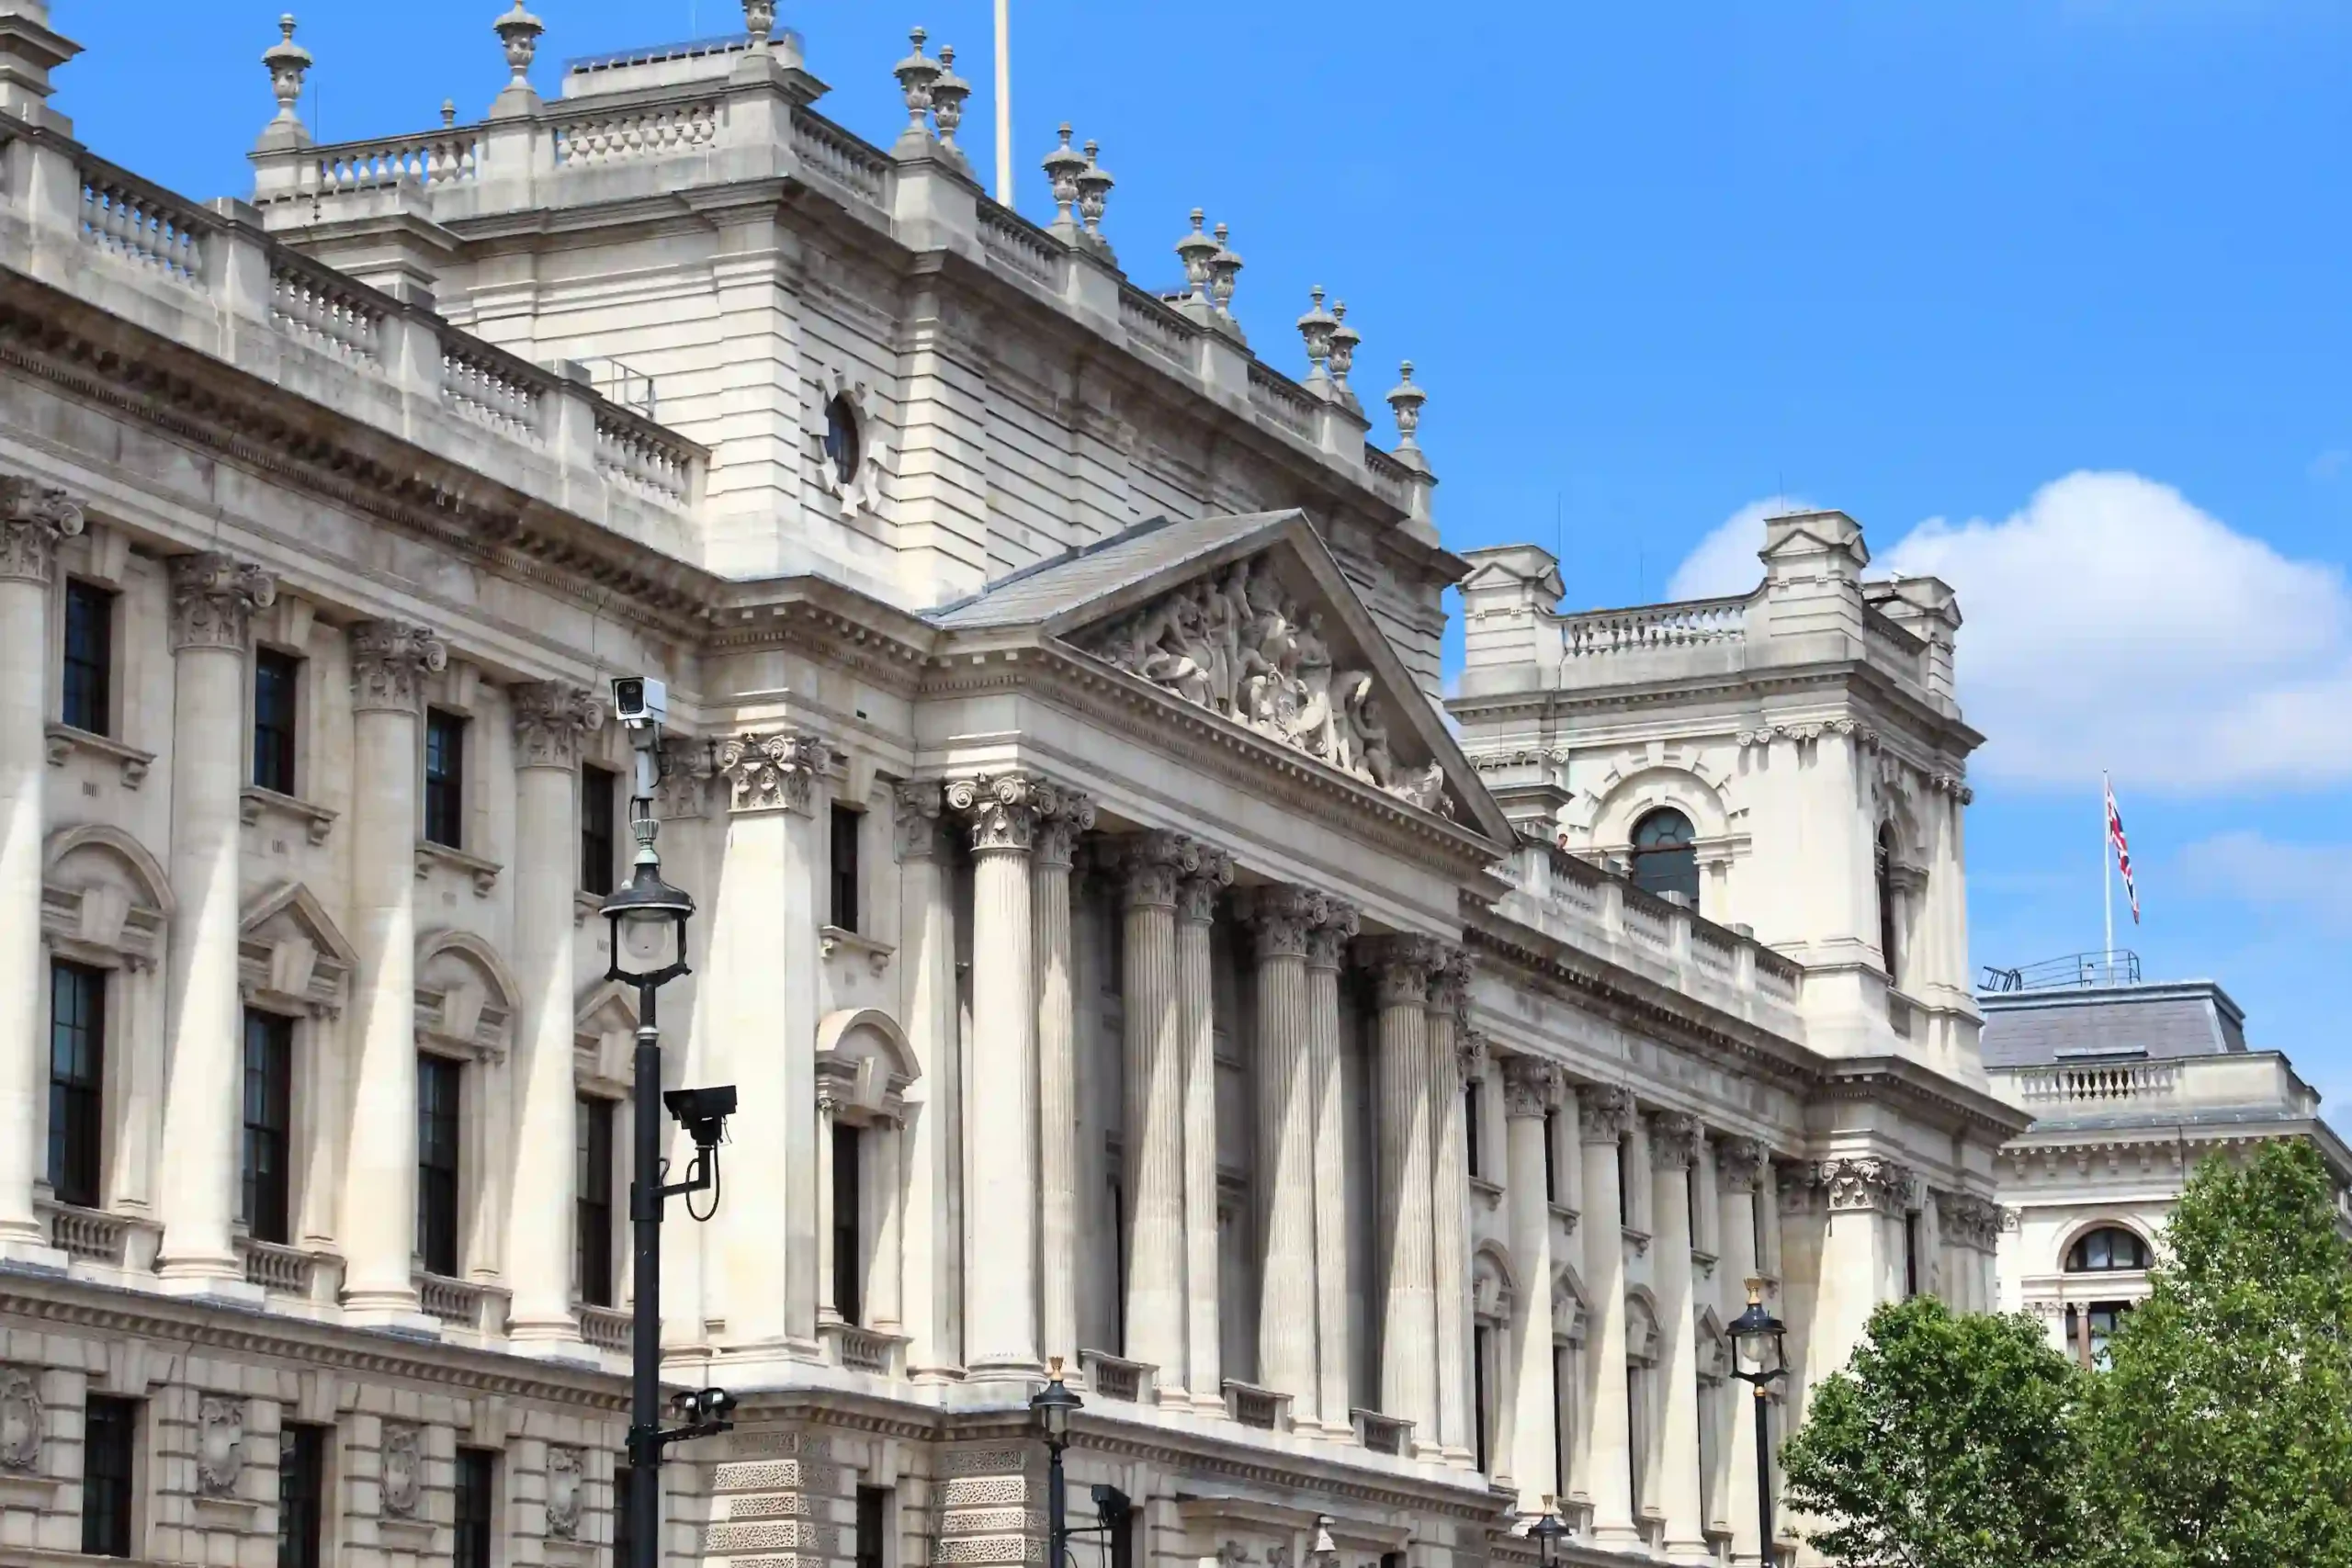 A picture of the HM Revenue & Customs building in central London.